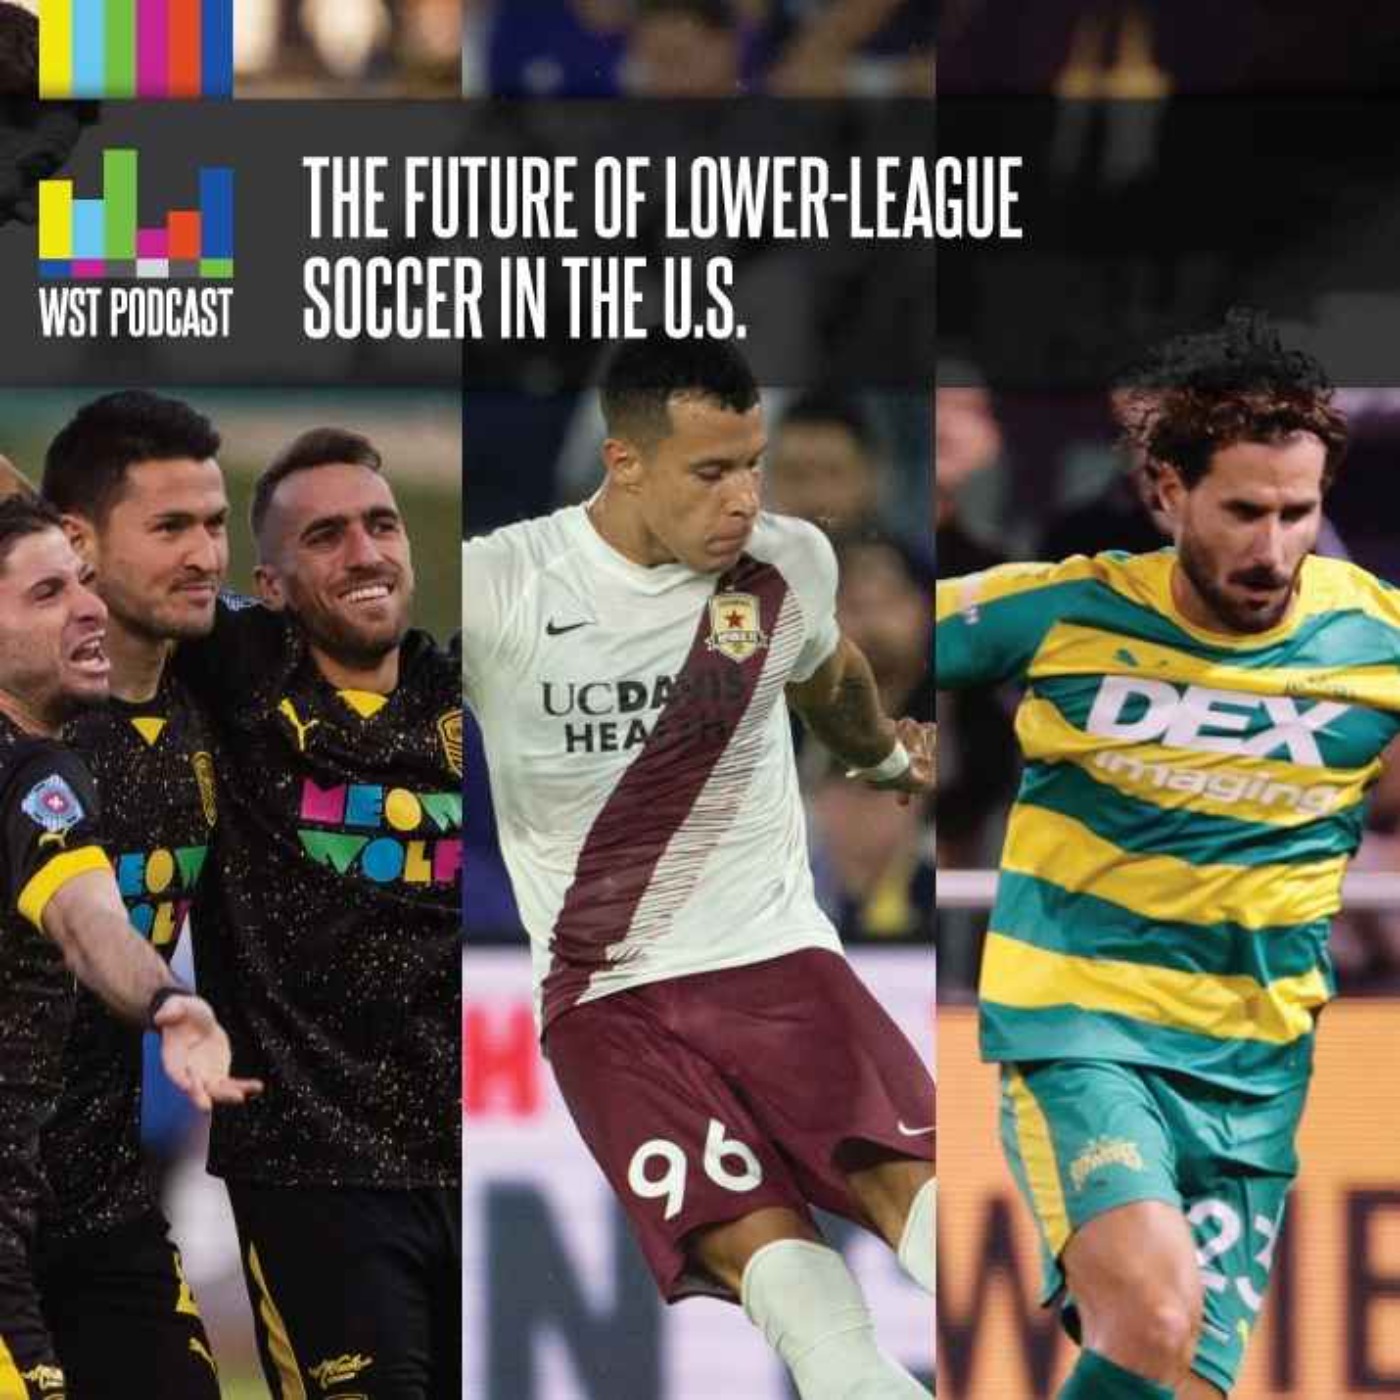 The future of lower-league soccer in the U.S.